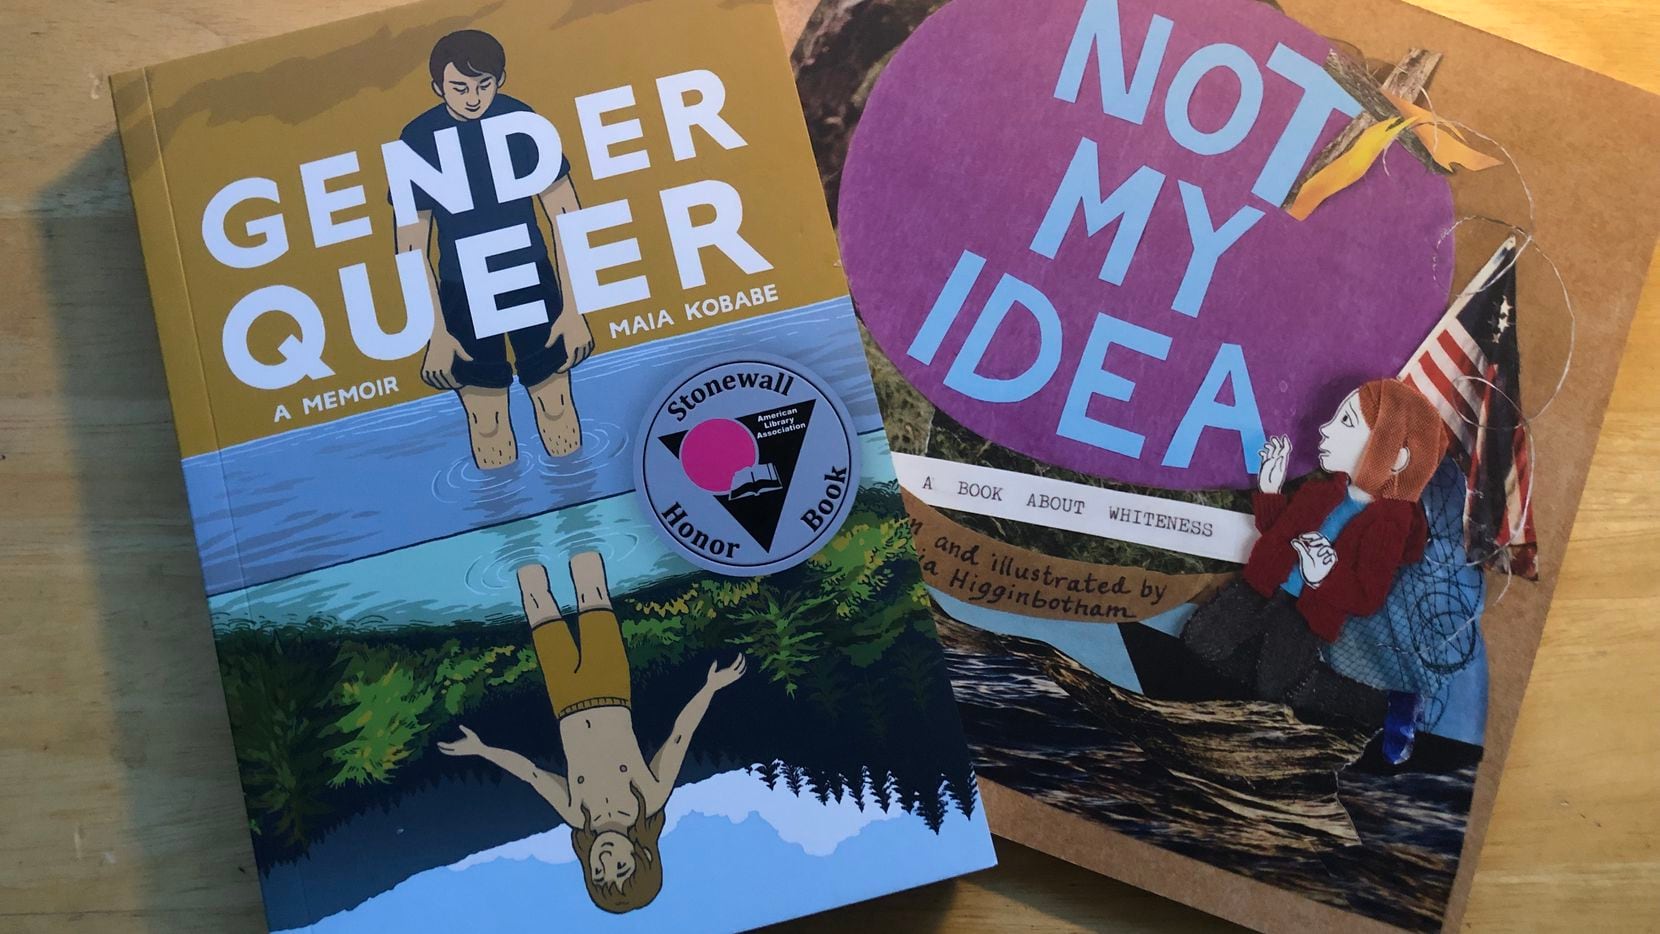 Book covers of Gender Queer by Maia Kobabe and Not My Idea: A Book About Whiteness by Anastasia Higginbotham. Both recently banned by Texas and Florida schools. 

Covered by Bookstr News